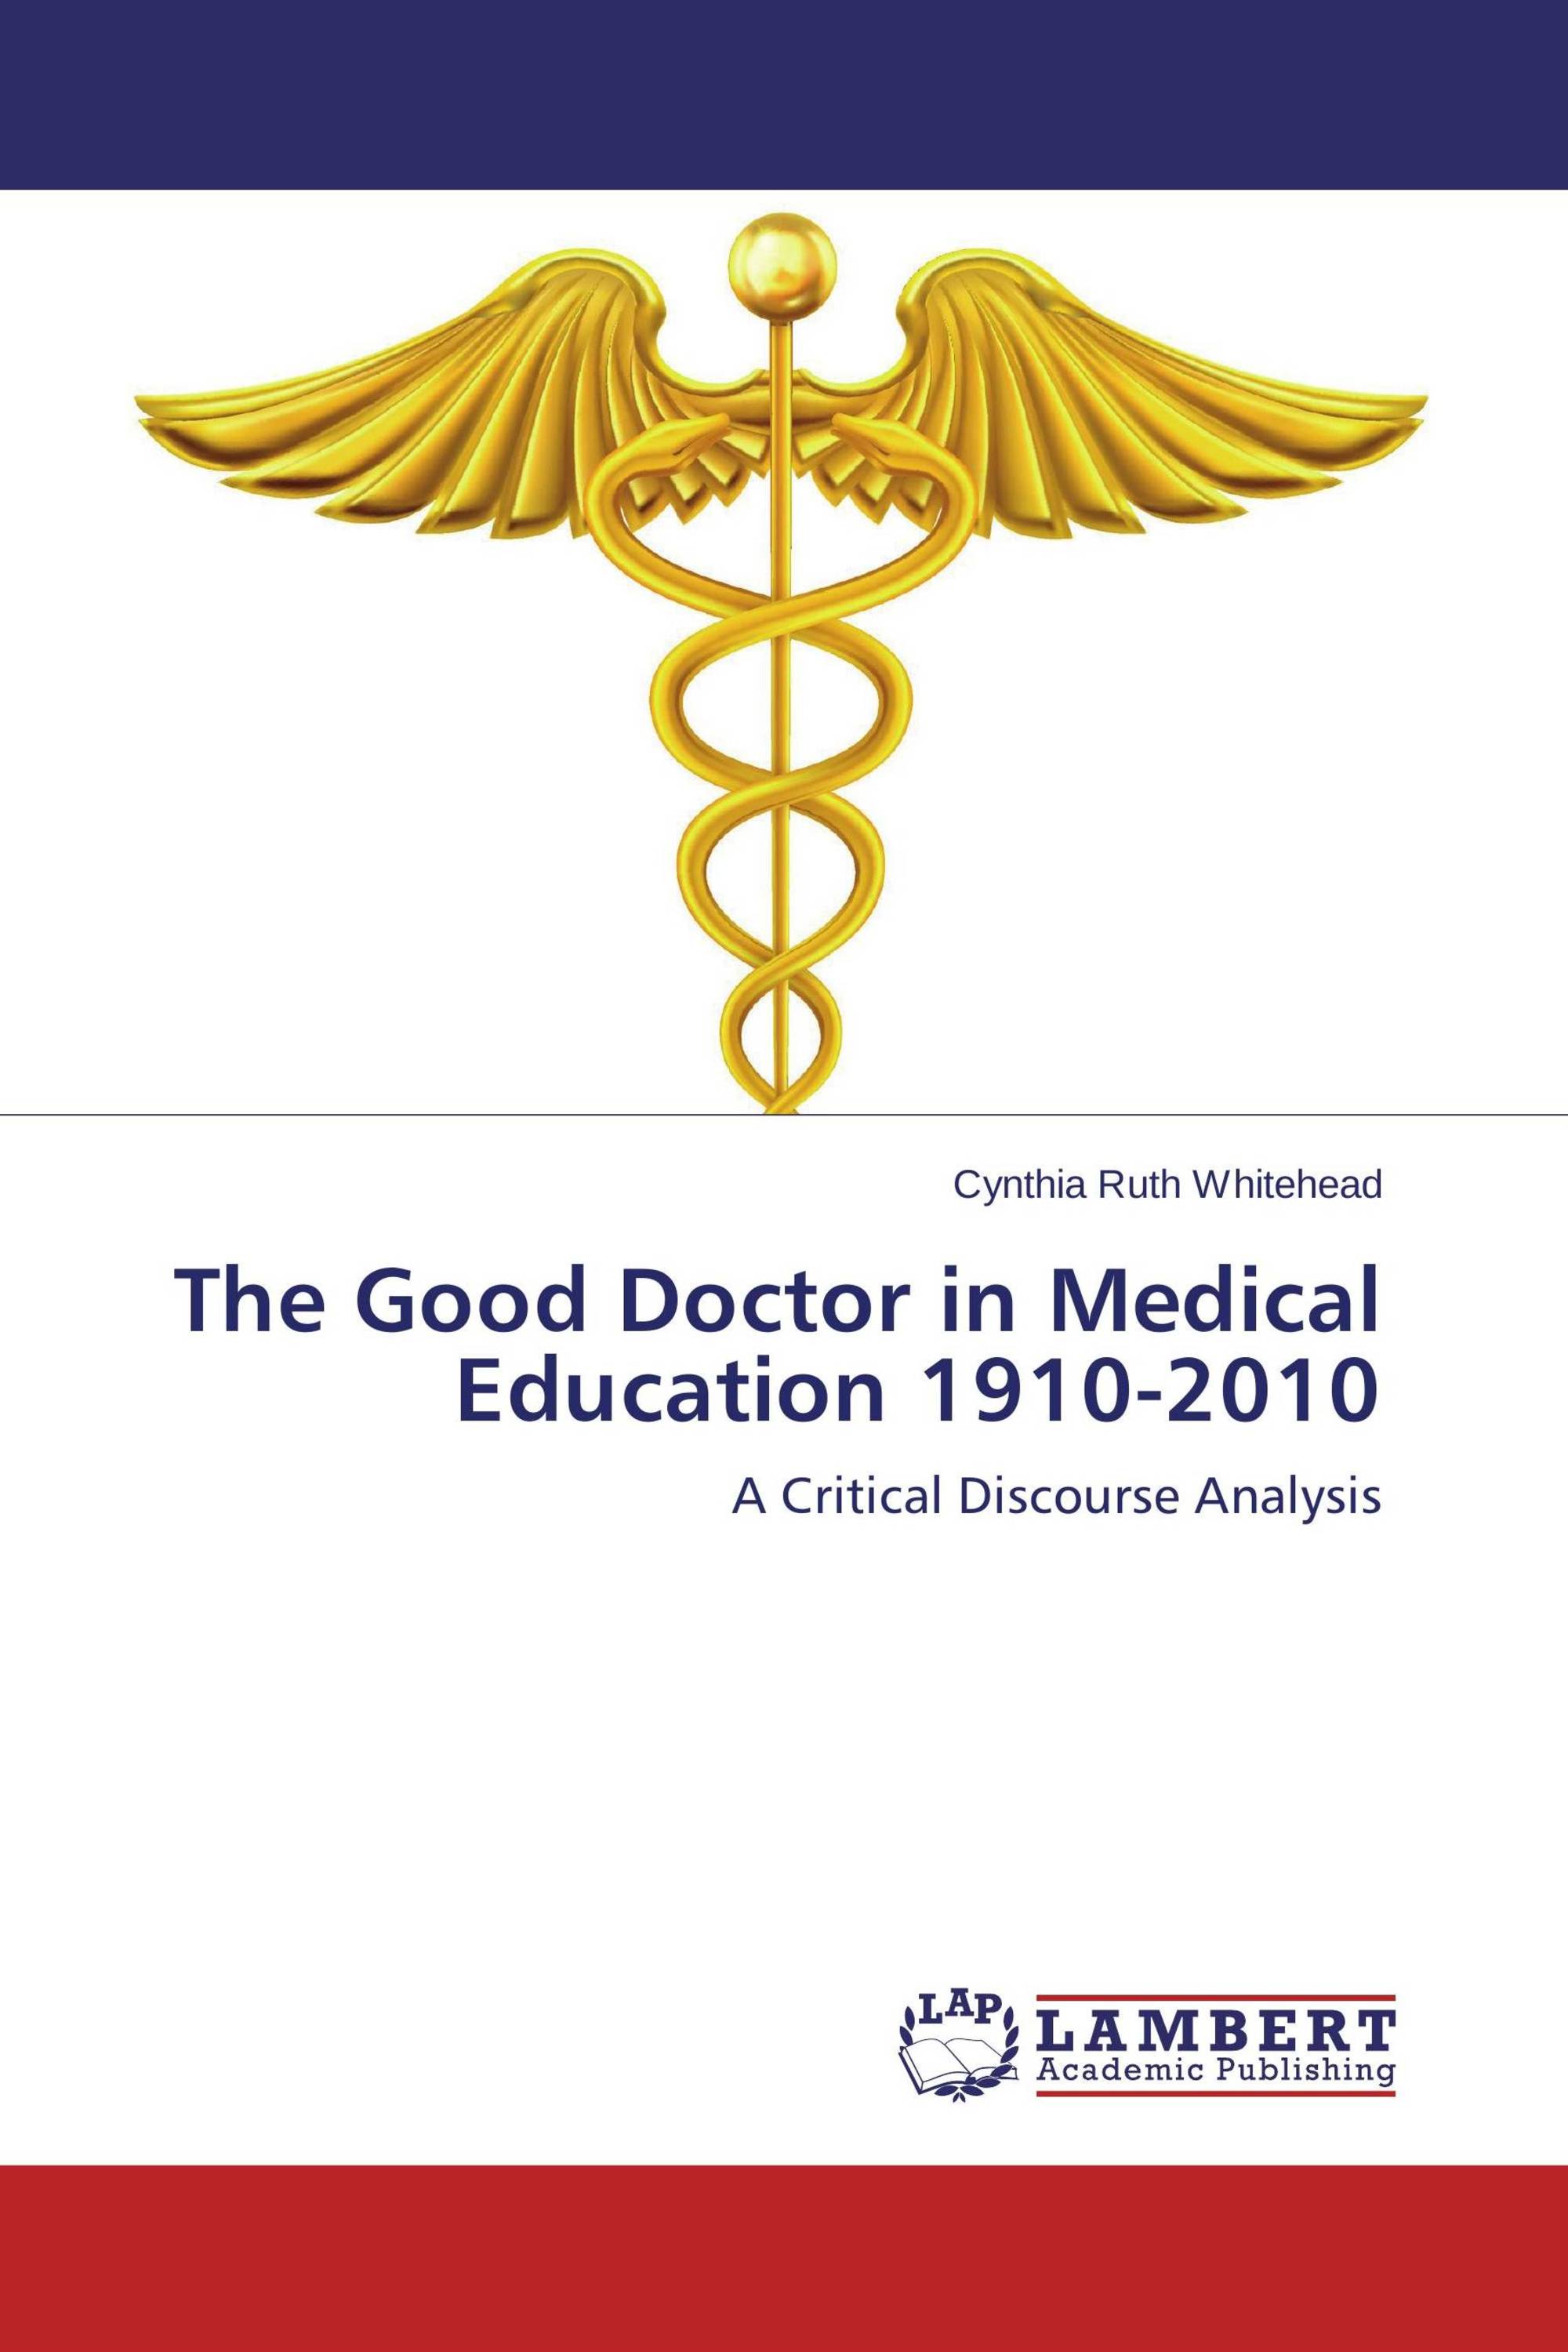 The Good Doctor in Medical Education 1910-2010